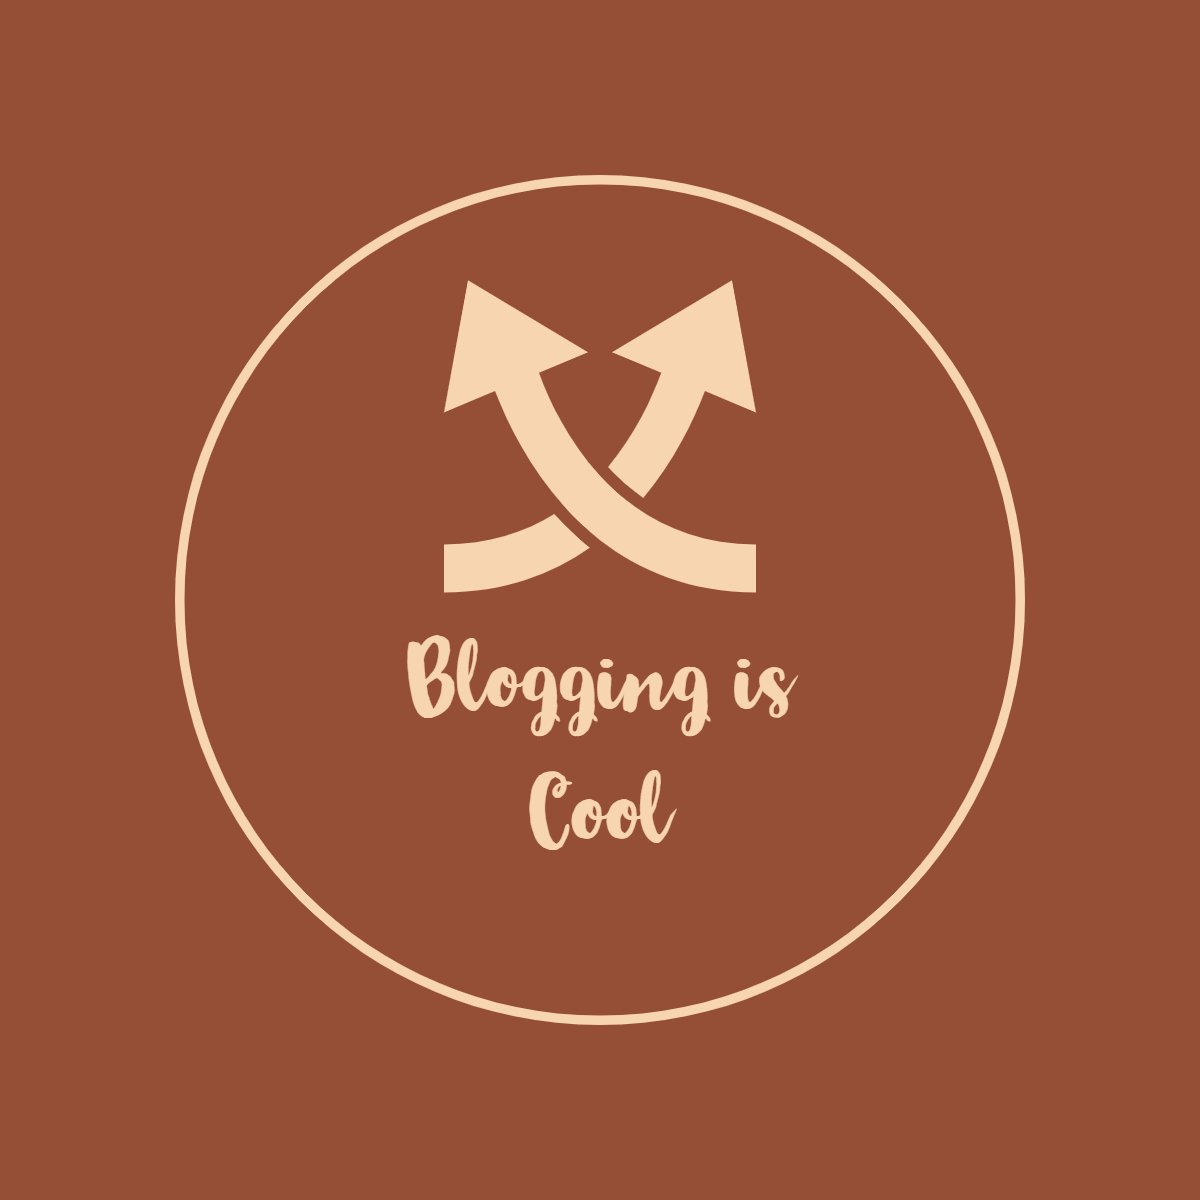 bloggingiscool.com is the new way of learning how to blog for profit.